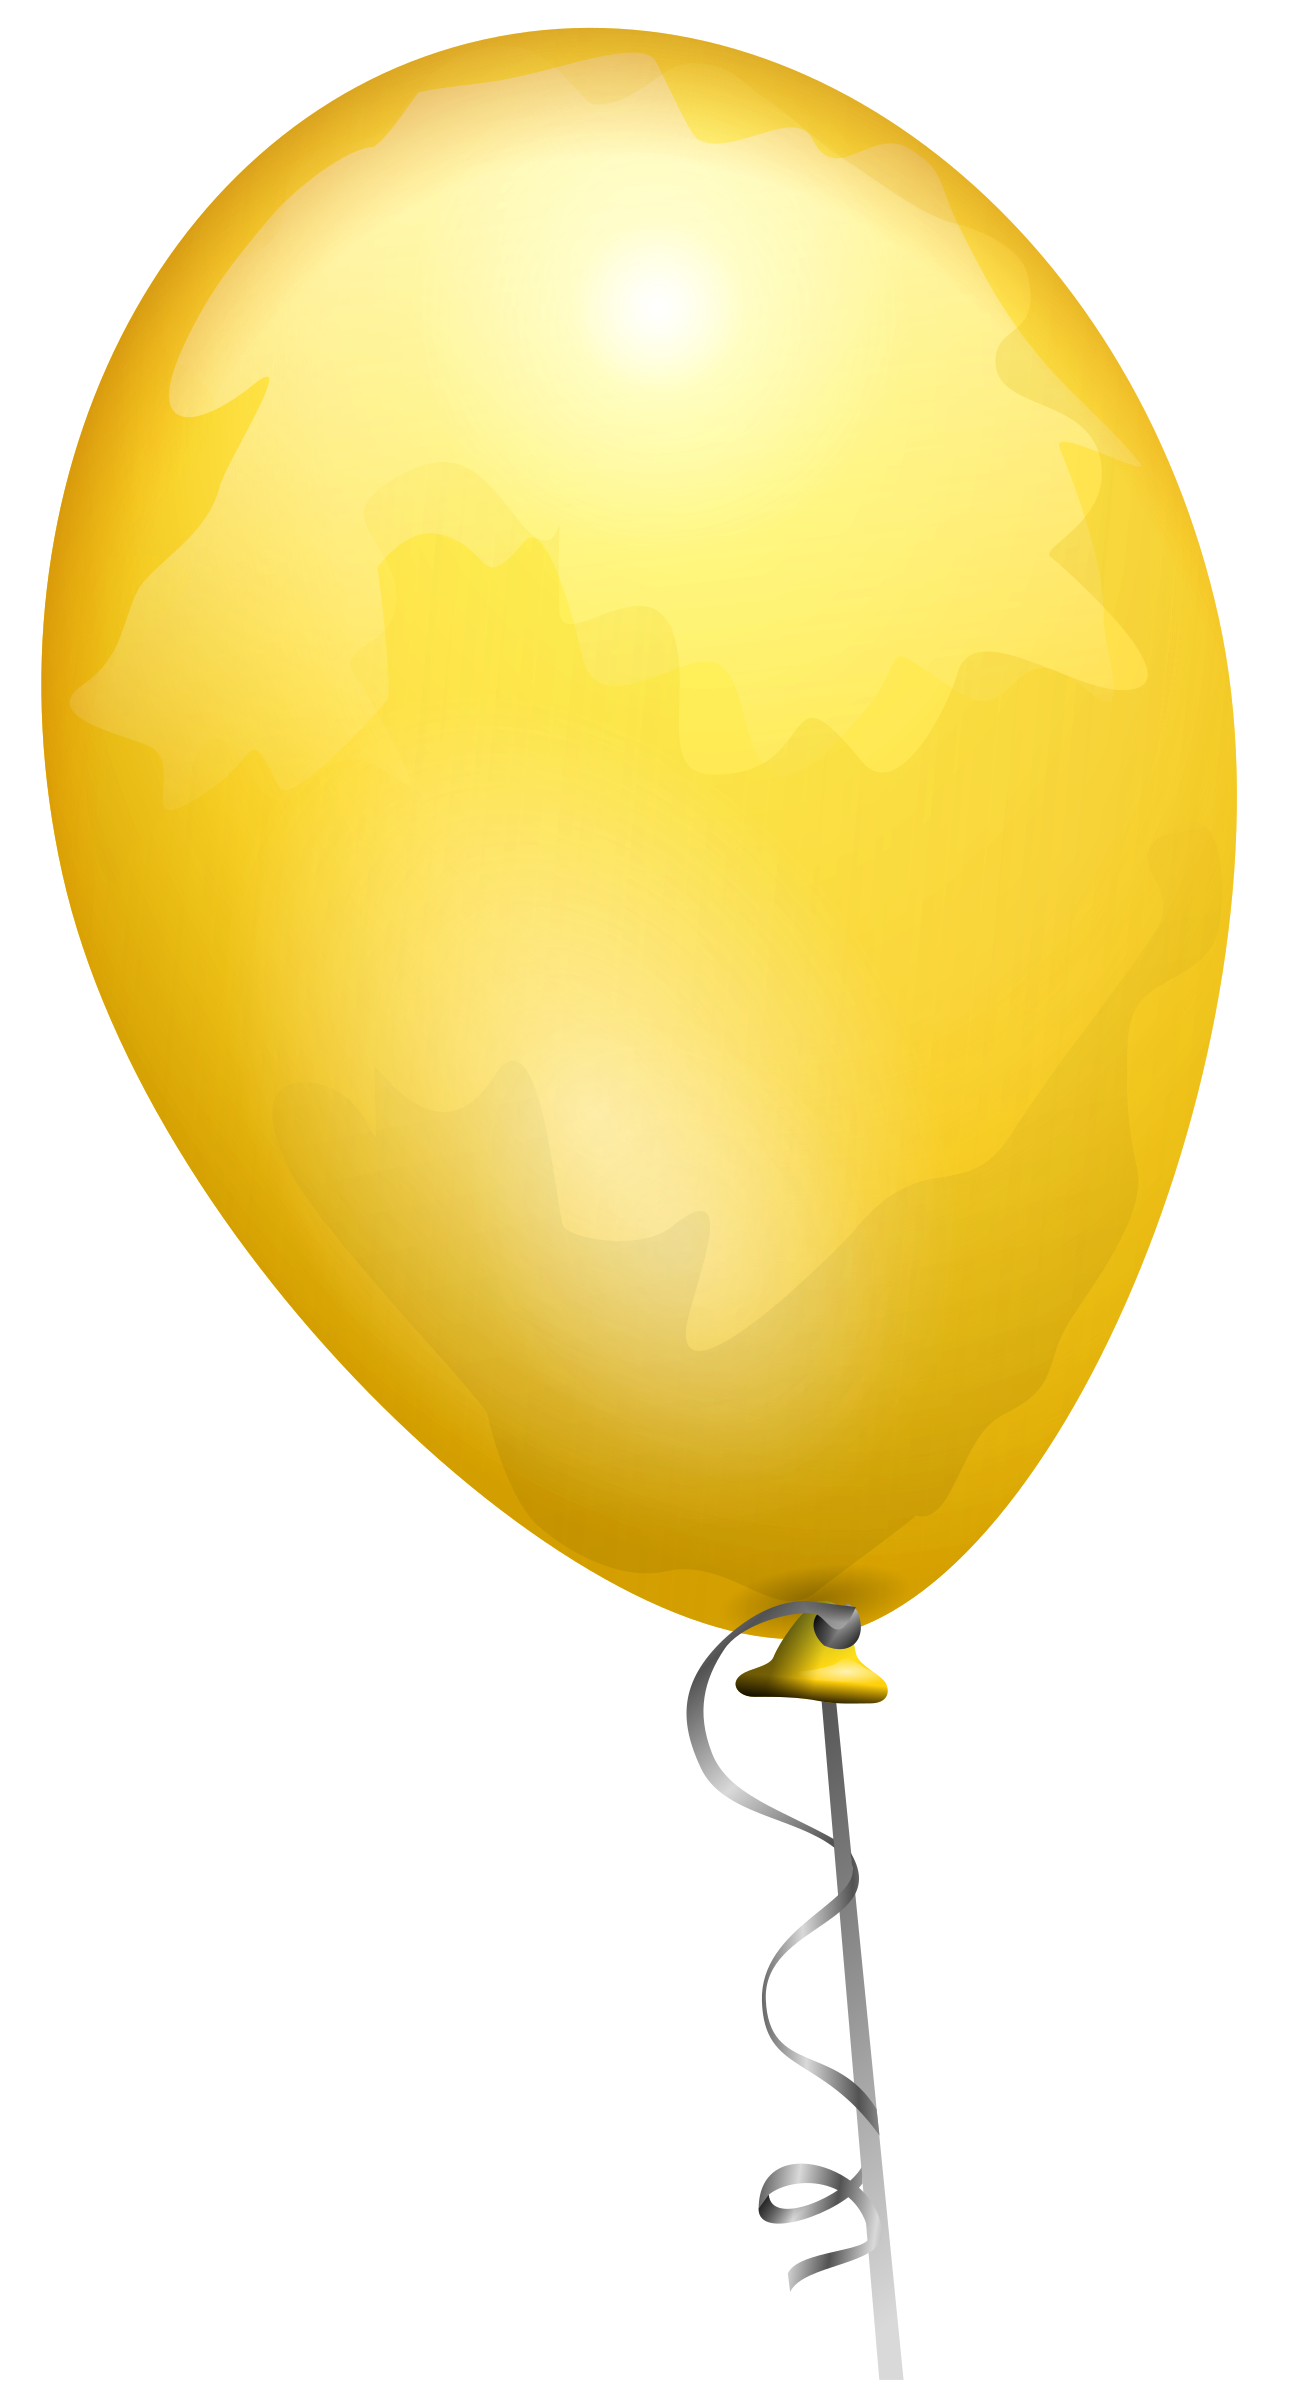 Clipart balloon string. Yellow big image png